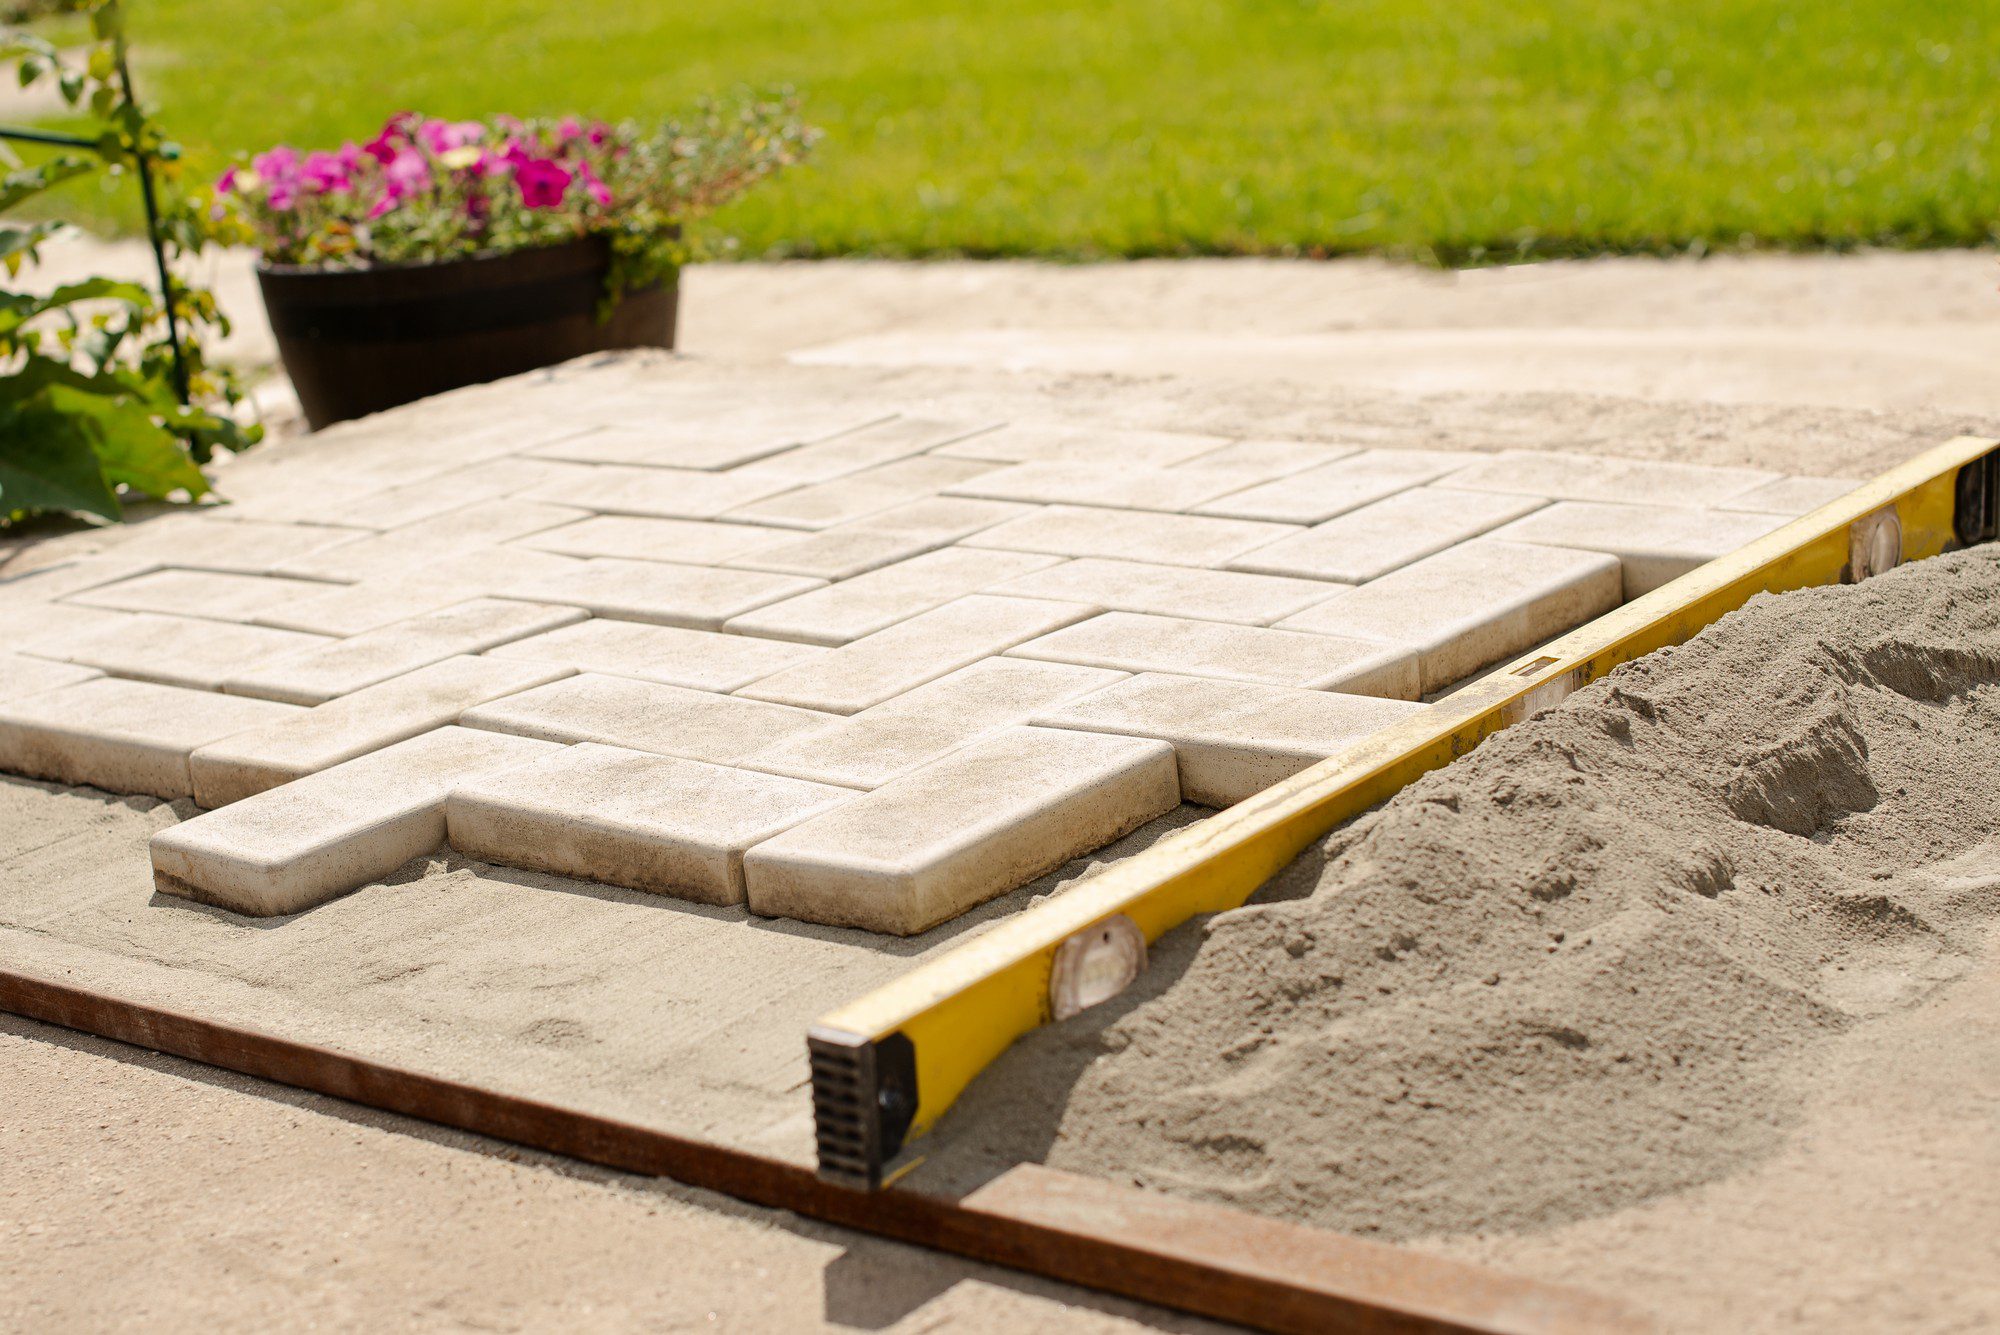 This image shows a section of patio or walkway under construction. There are paving stones laid out in a herringbone pattern on top of what looks to be a bed of sand, which is used for leveling and stabilization. A level tool with a yellow body is placed across the pavers to ensure they are even and flat. In the background, you can see a portion of a flower pot with pink flowers and a green grassy area, indicating that this is an outdoor setting. There are also wooden boards framing the edges of the sandy area, which are likely being used to contain the sand and pavers during installation.